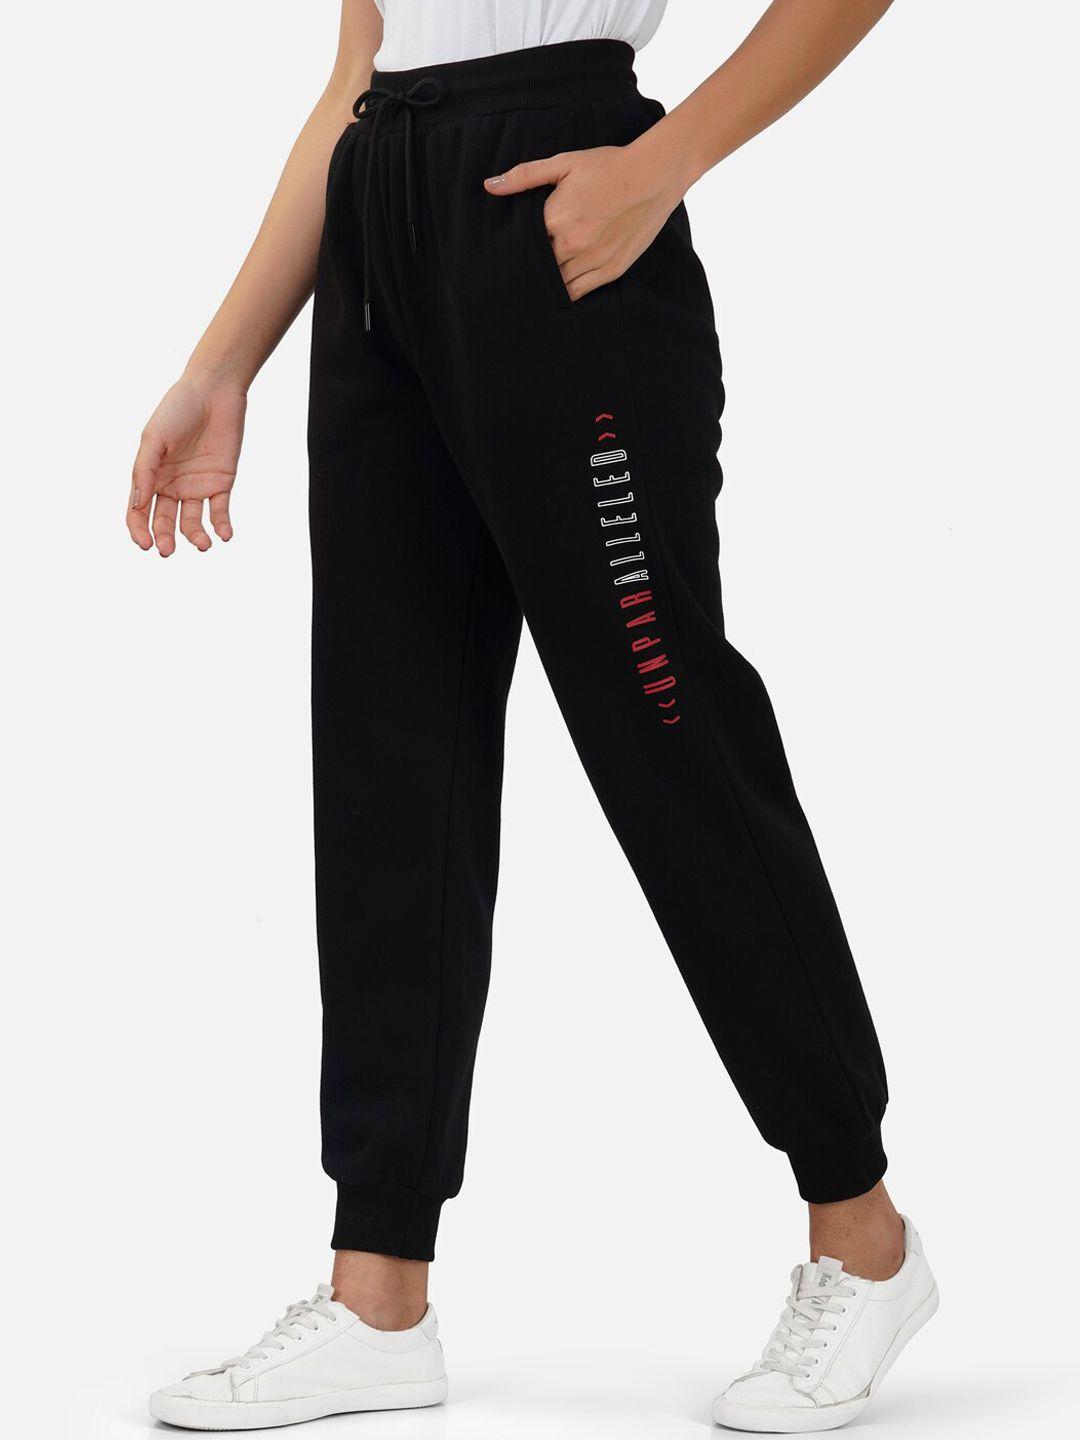 unpar women typography printed training or gym joggers